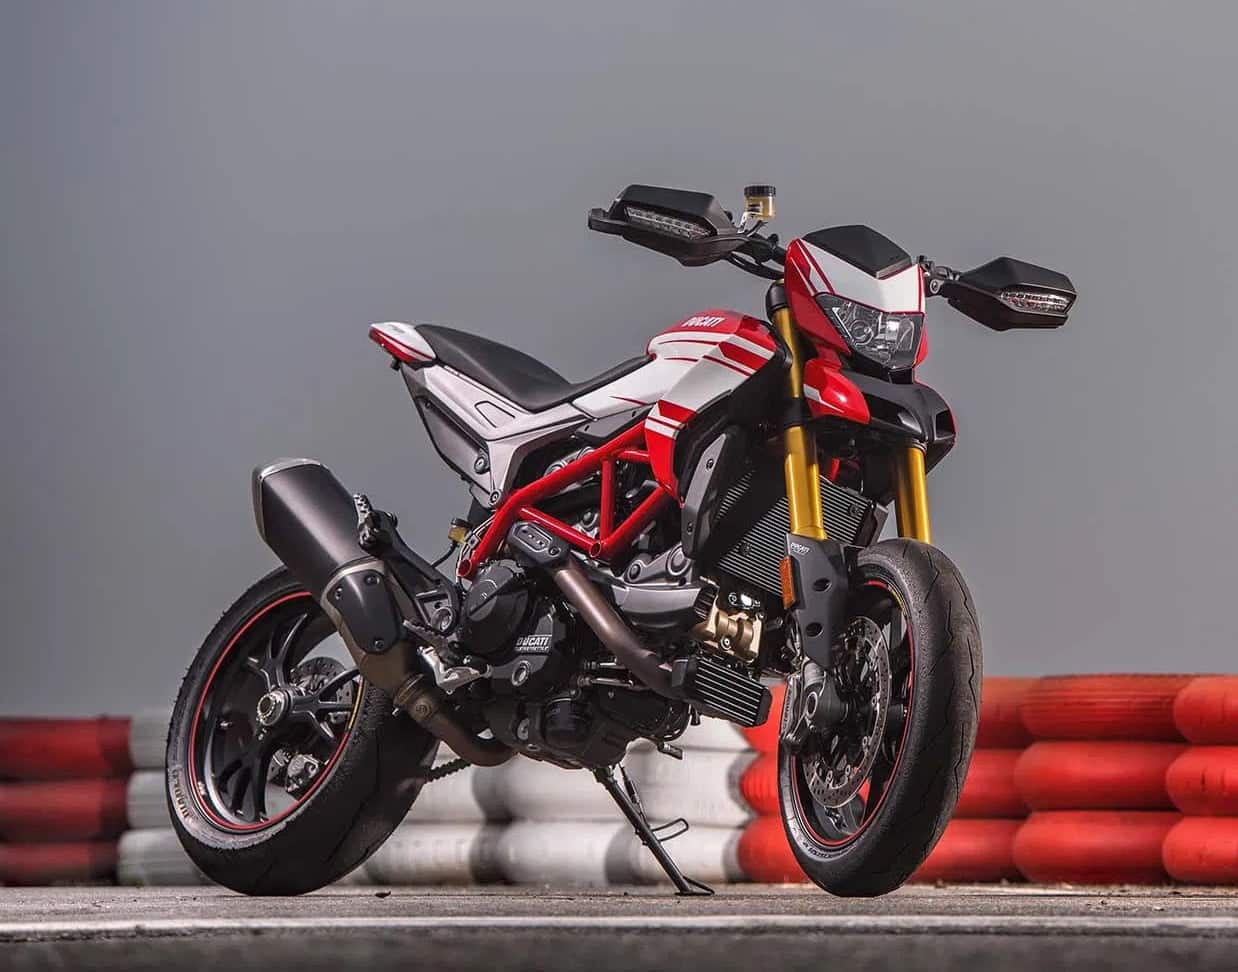 Red and white Ducati Hypermotard 939 SP on track